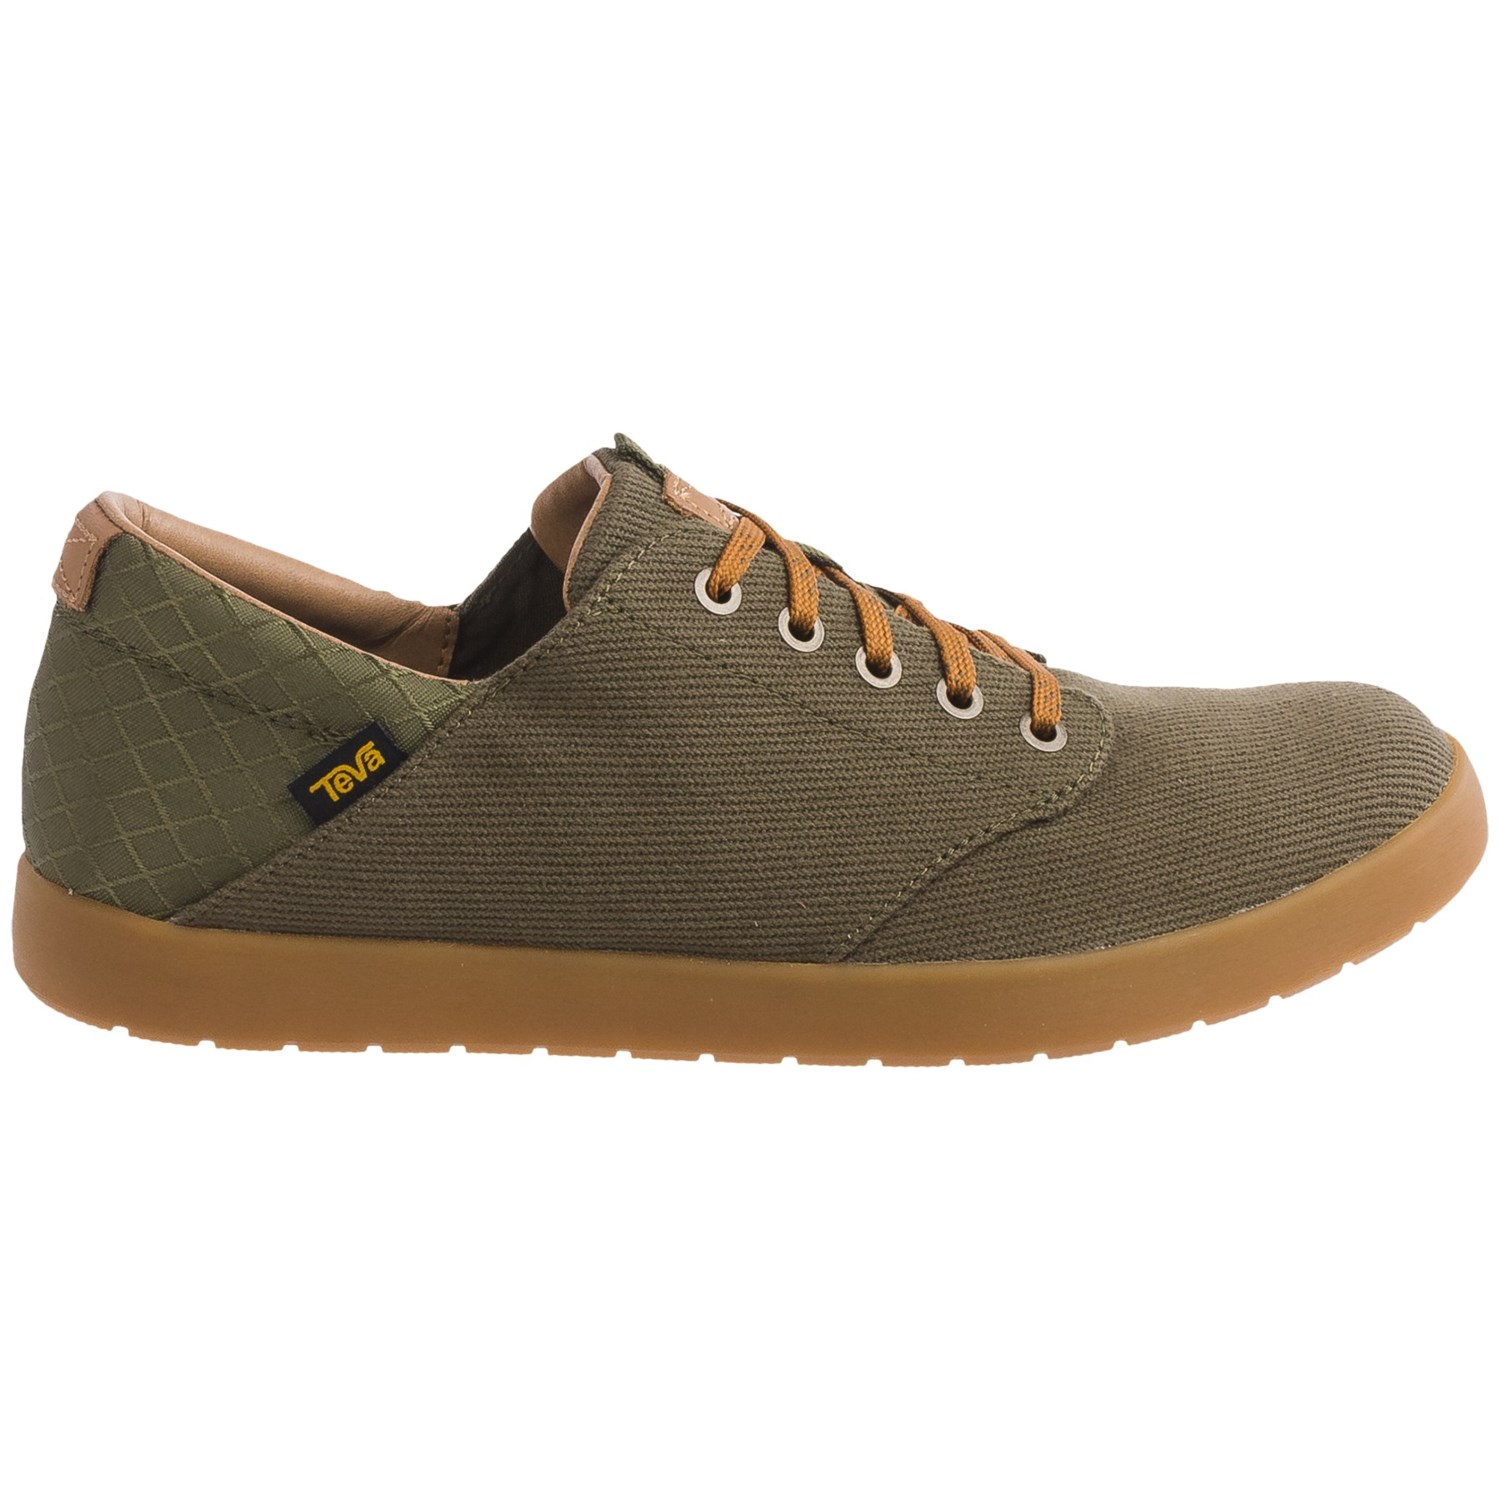 Teva Sterling Lace Canvas Shoes (For Men) - Save 42%